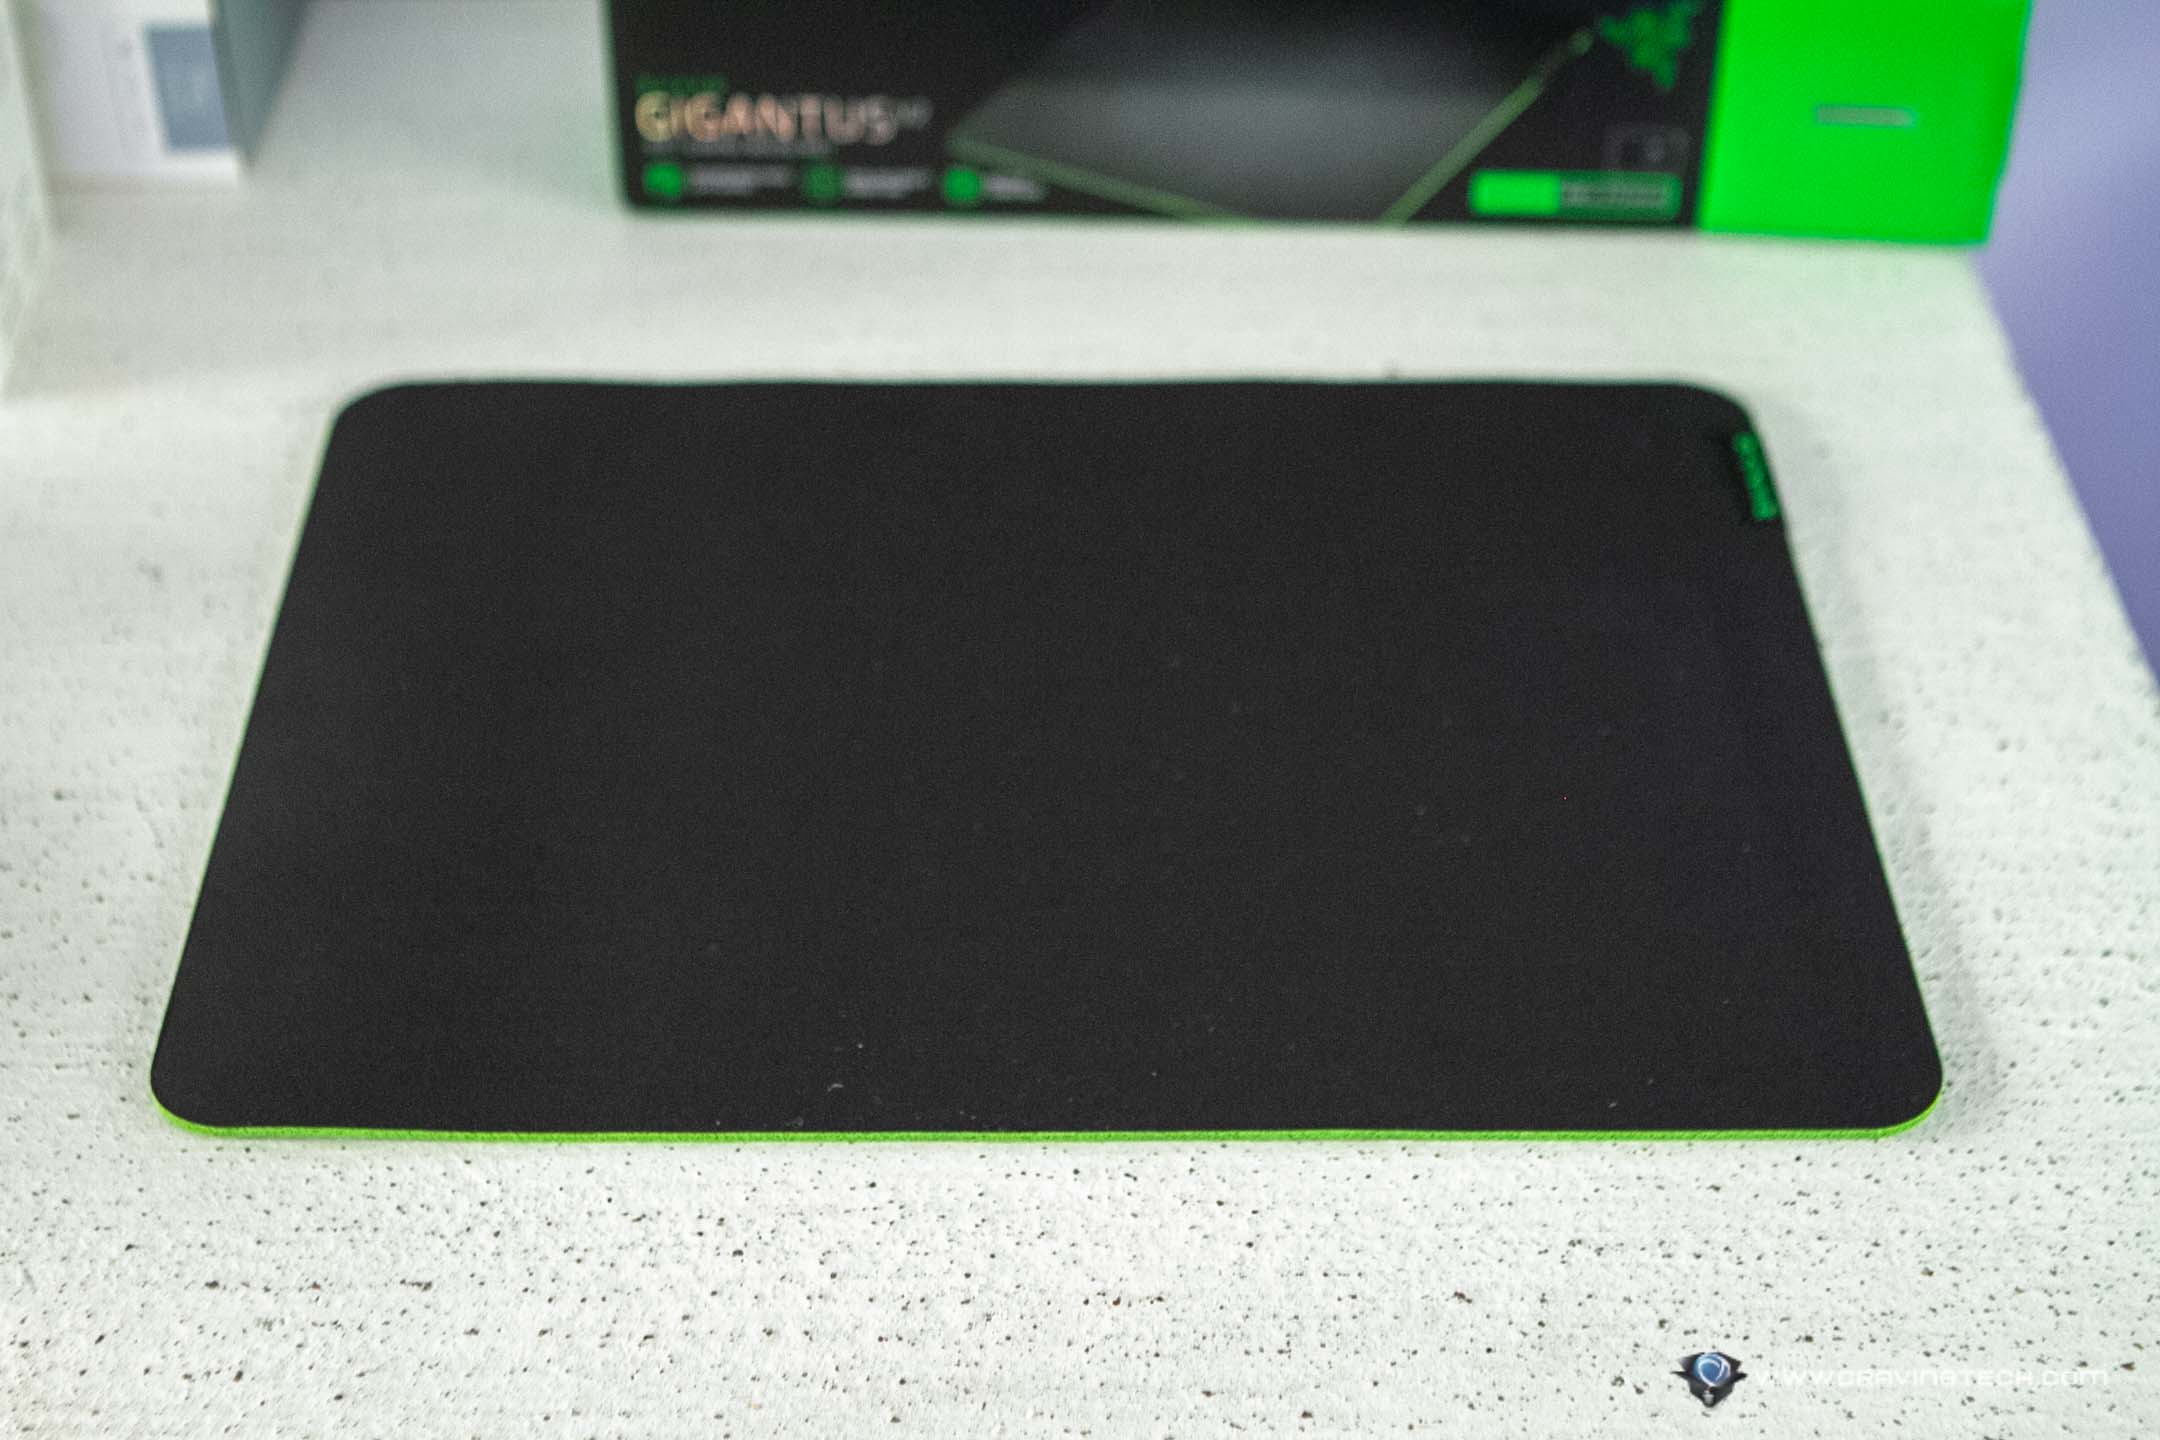 Razer Gigantus V2 Review - My current mouse mat of choice!